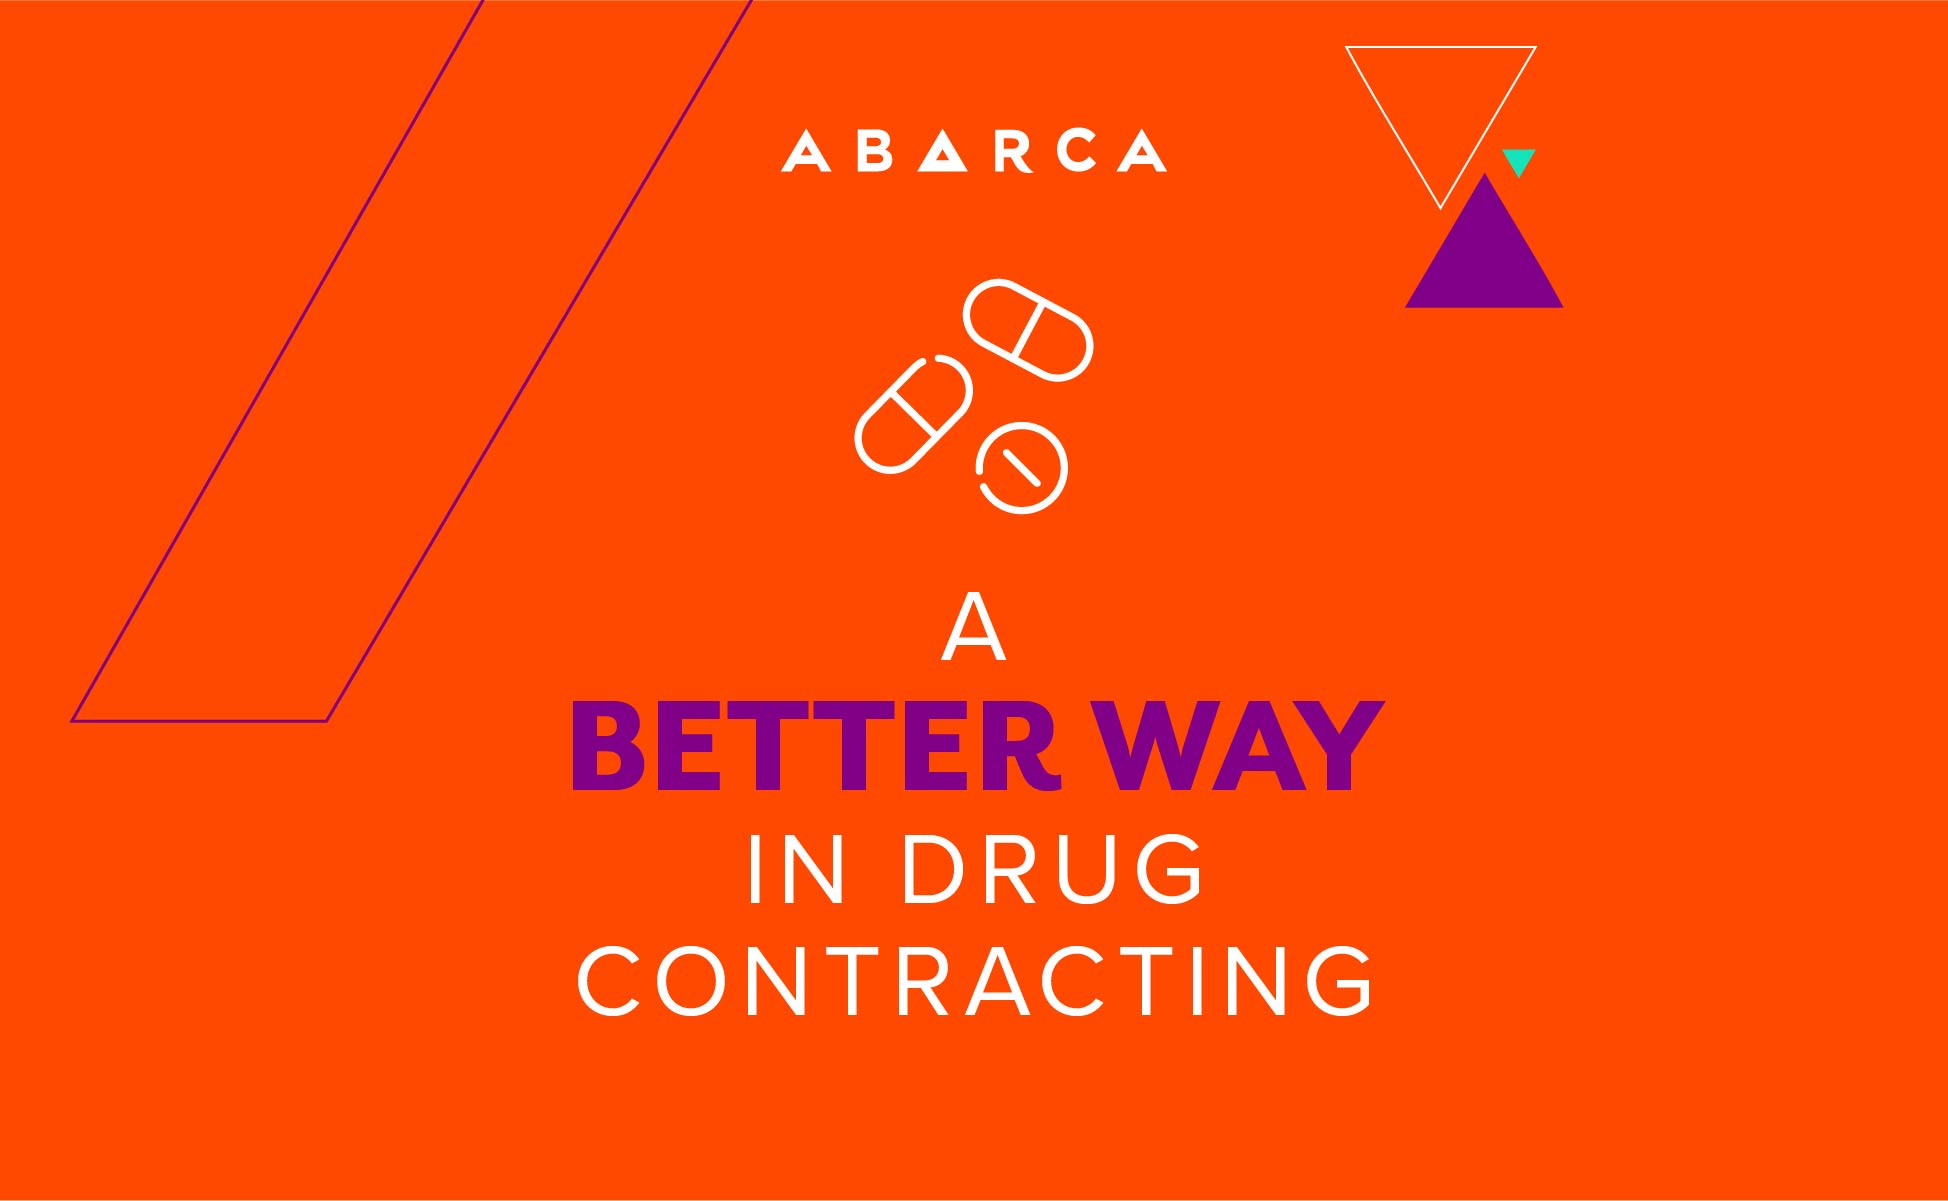 Abarca Health: A Better Way in Drug Contracting